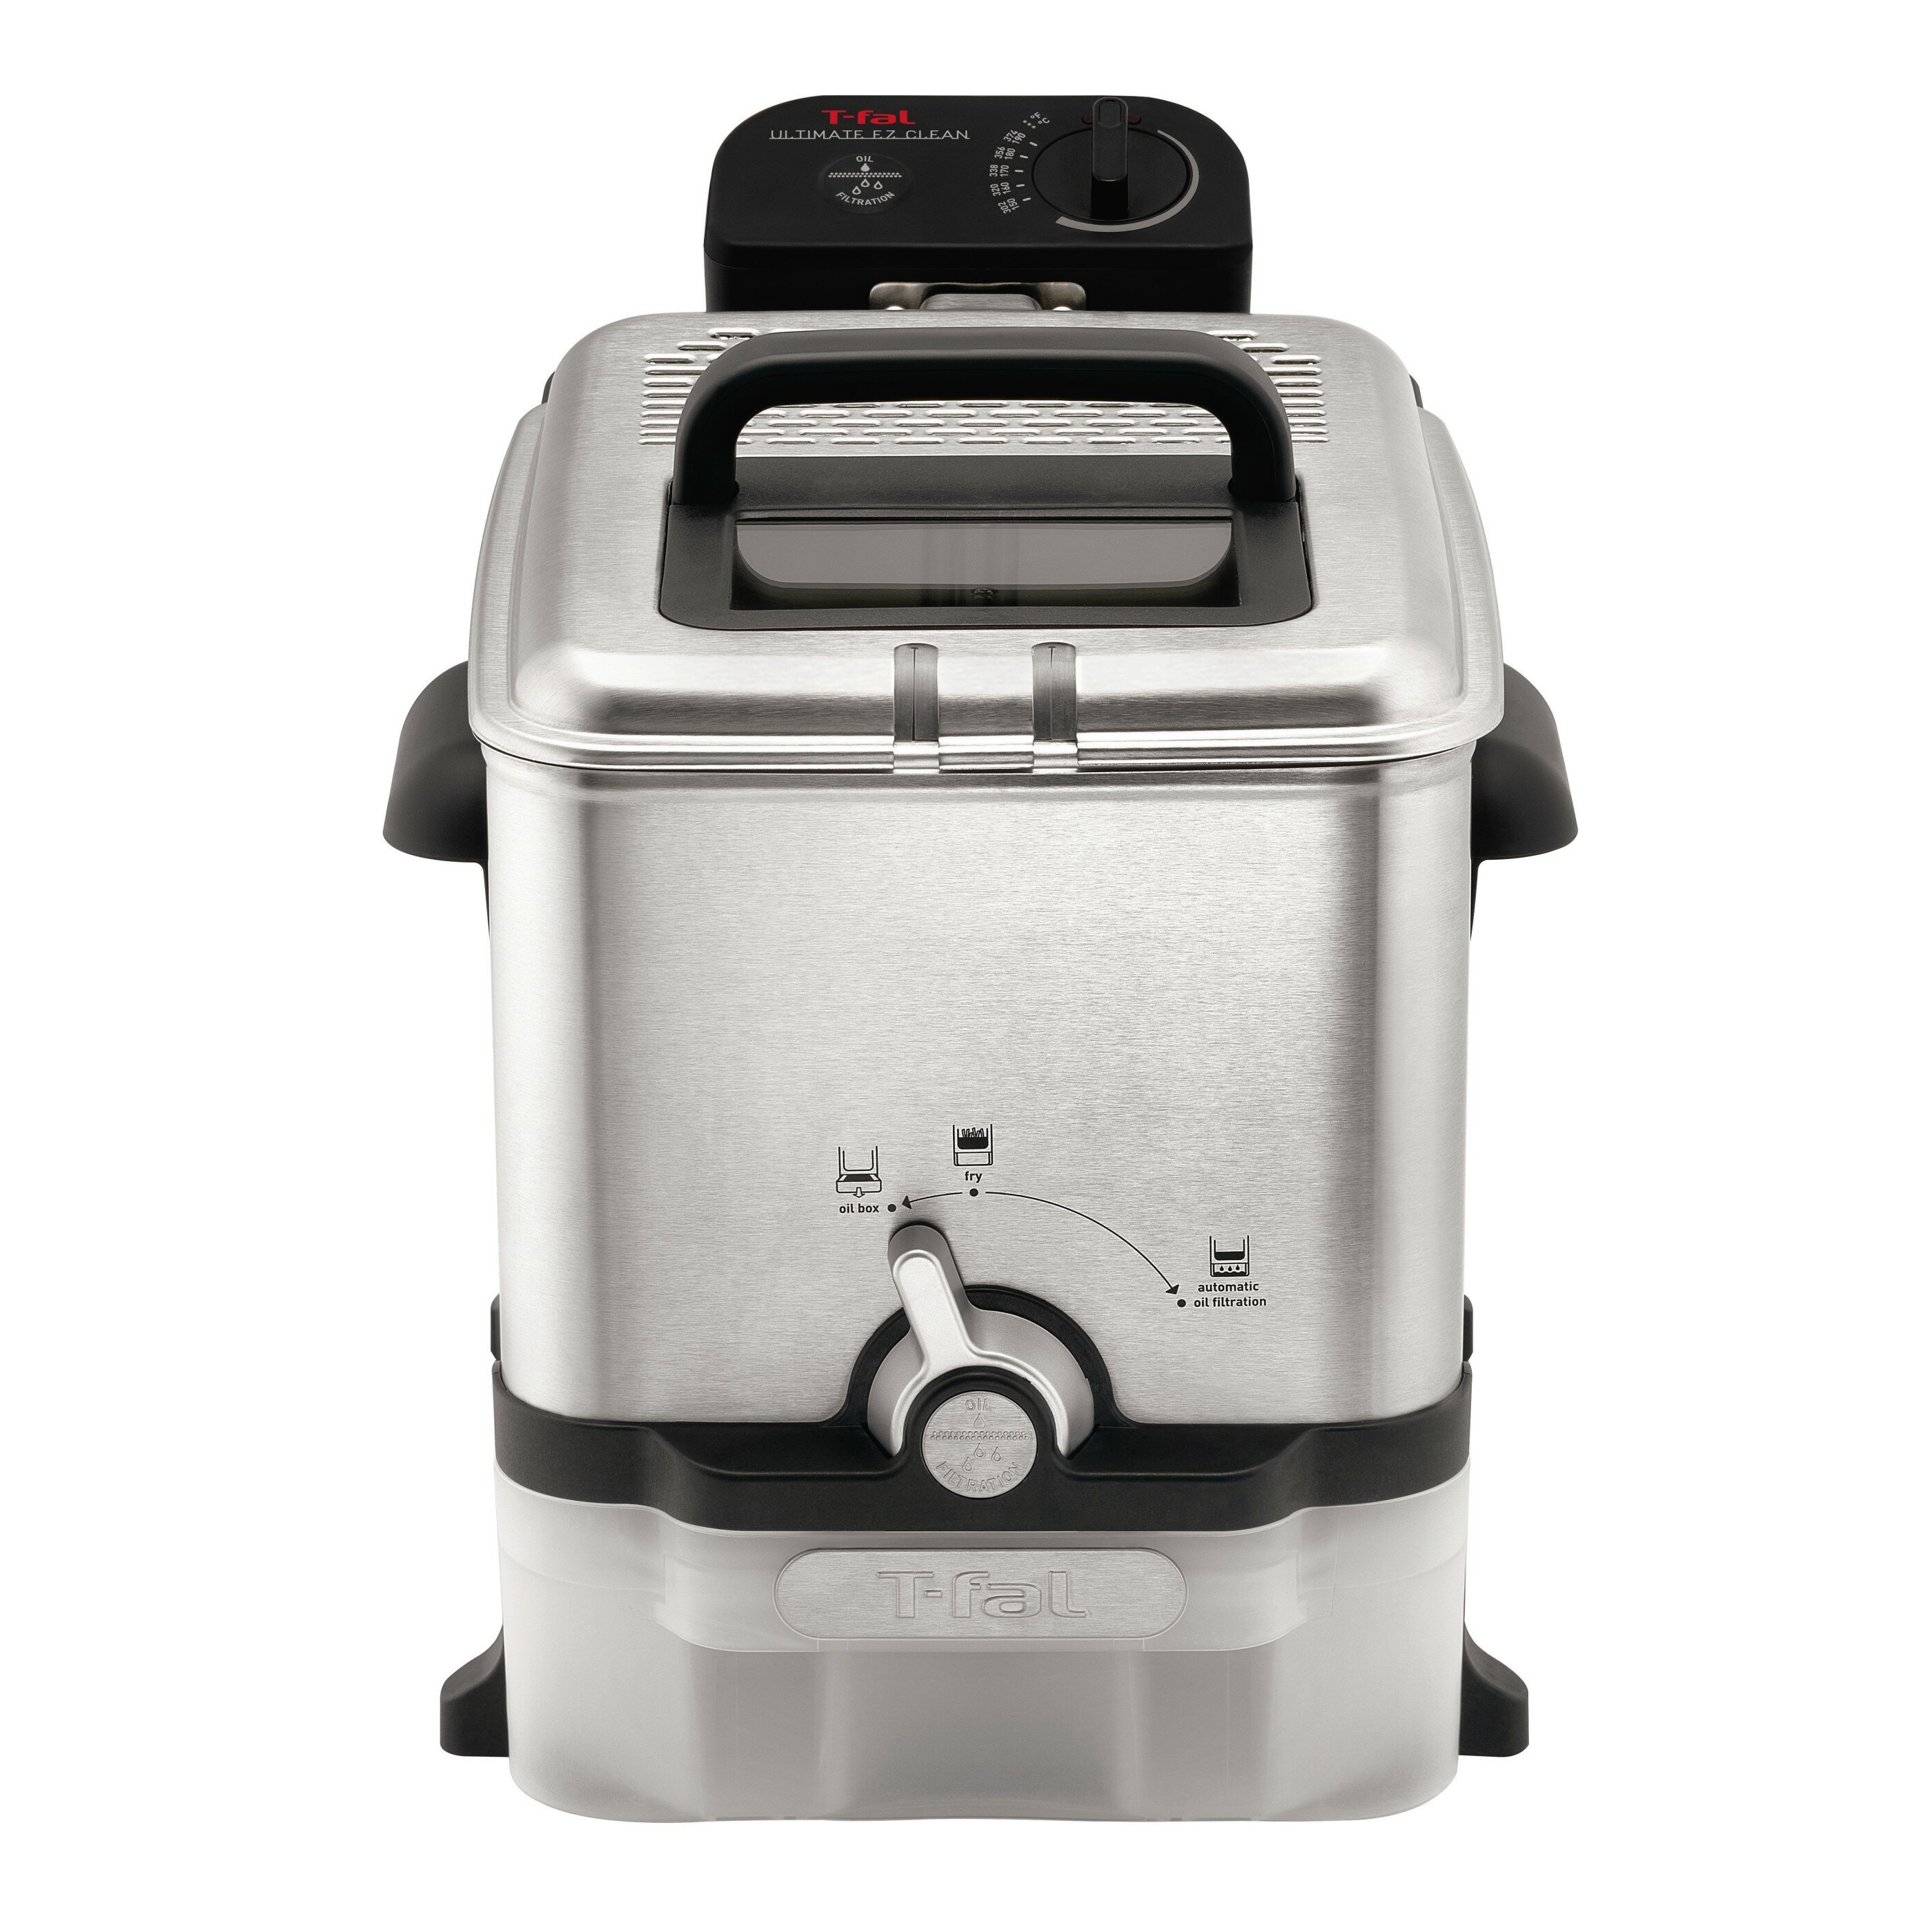 Stainless Steel T-fal Deep Fryer with Basket Easy to Clean Fryer Oil... 